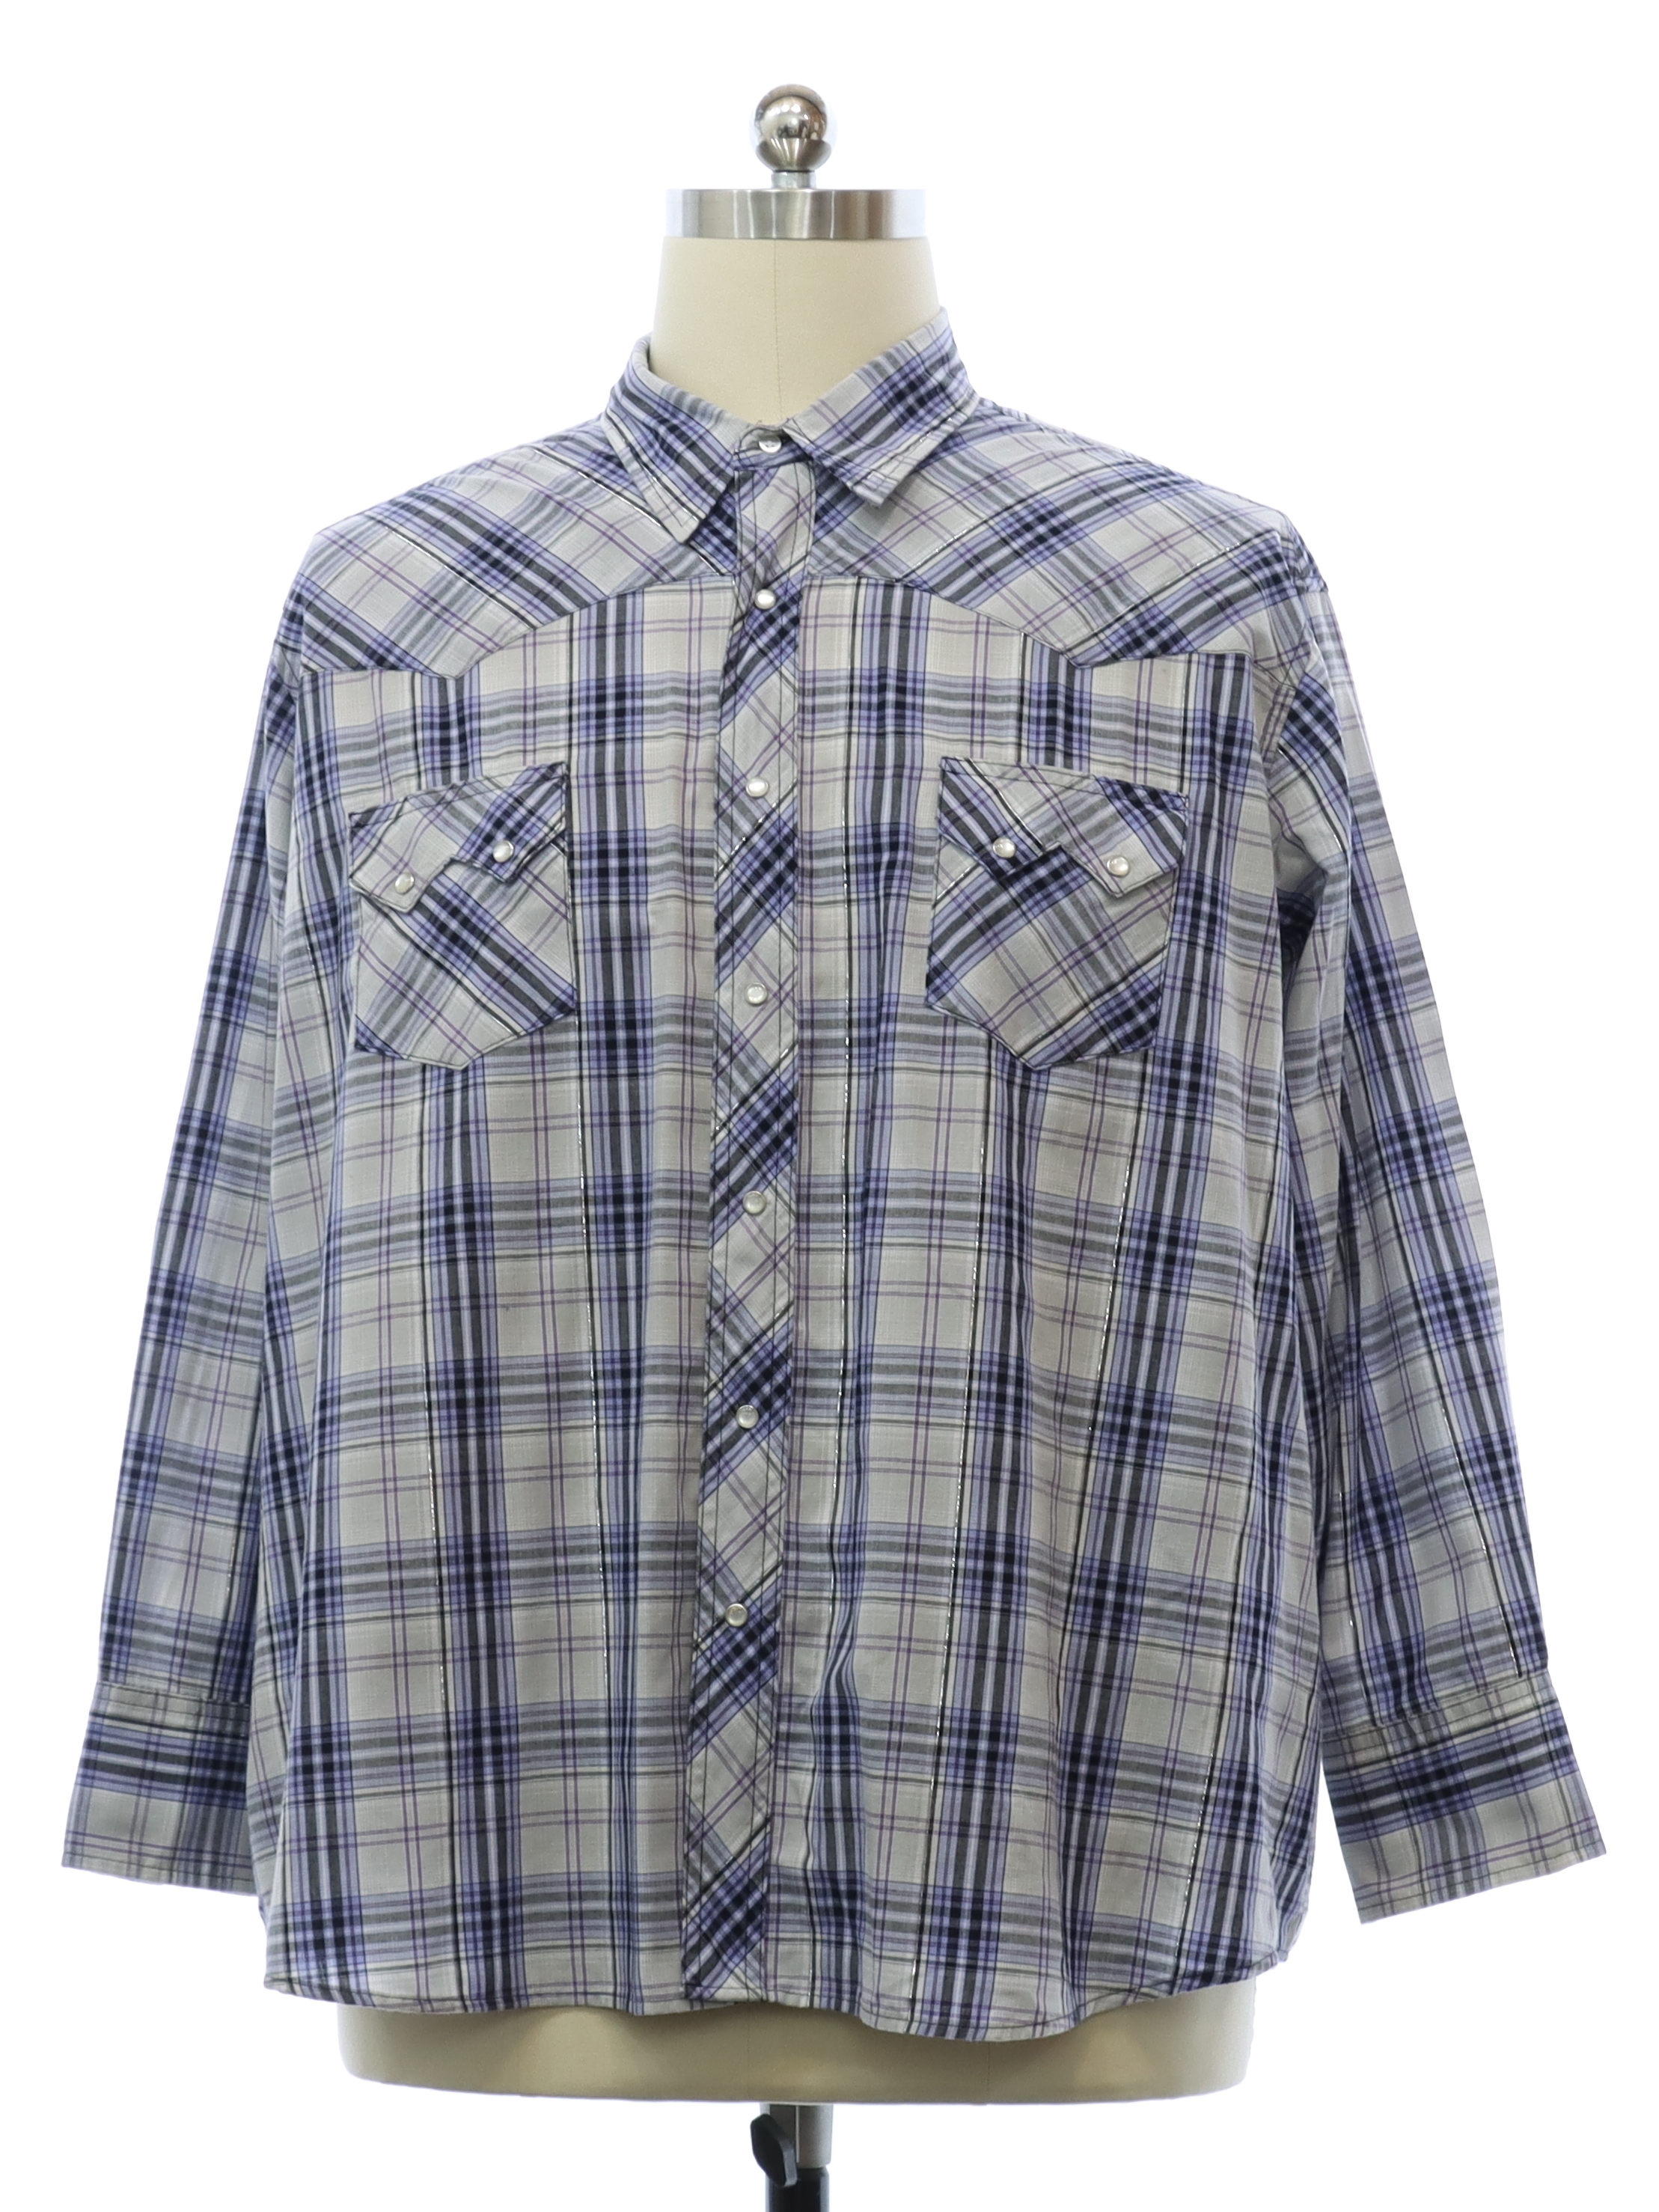 Western Shirt: 90s -Wrangler- Mens gray, lavender, purple, and silver lurex  plaid polyester cotton blend long sleeve western shirt. Pearlized snaps at  front placket and cuffs. Fold over collar, front and back